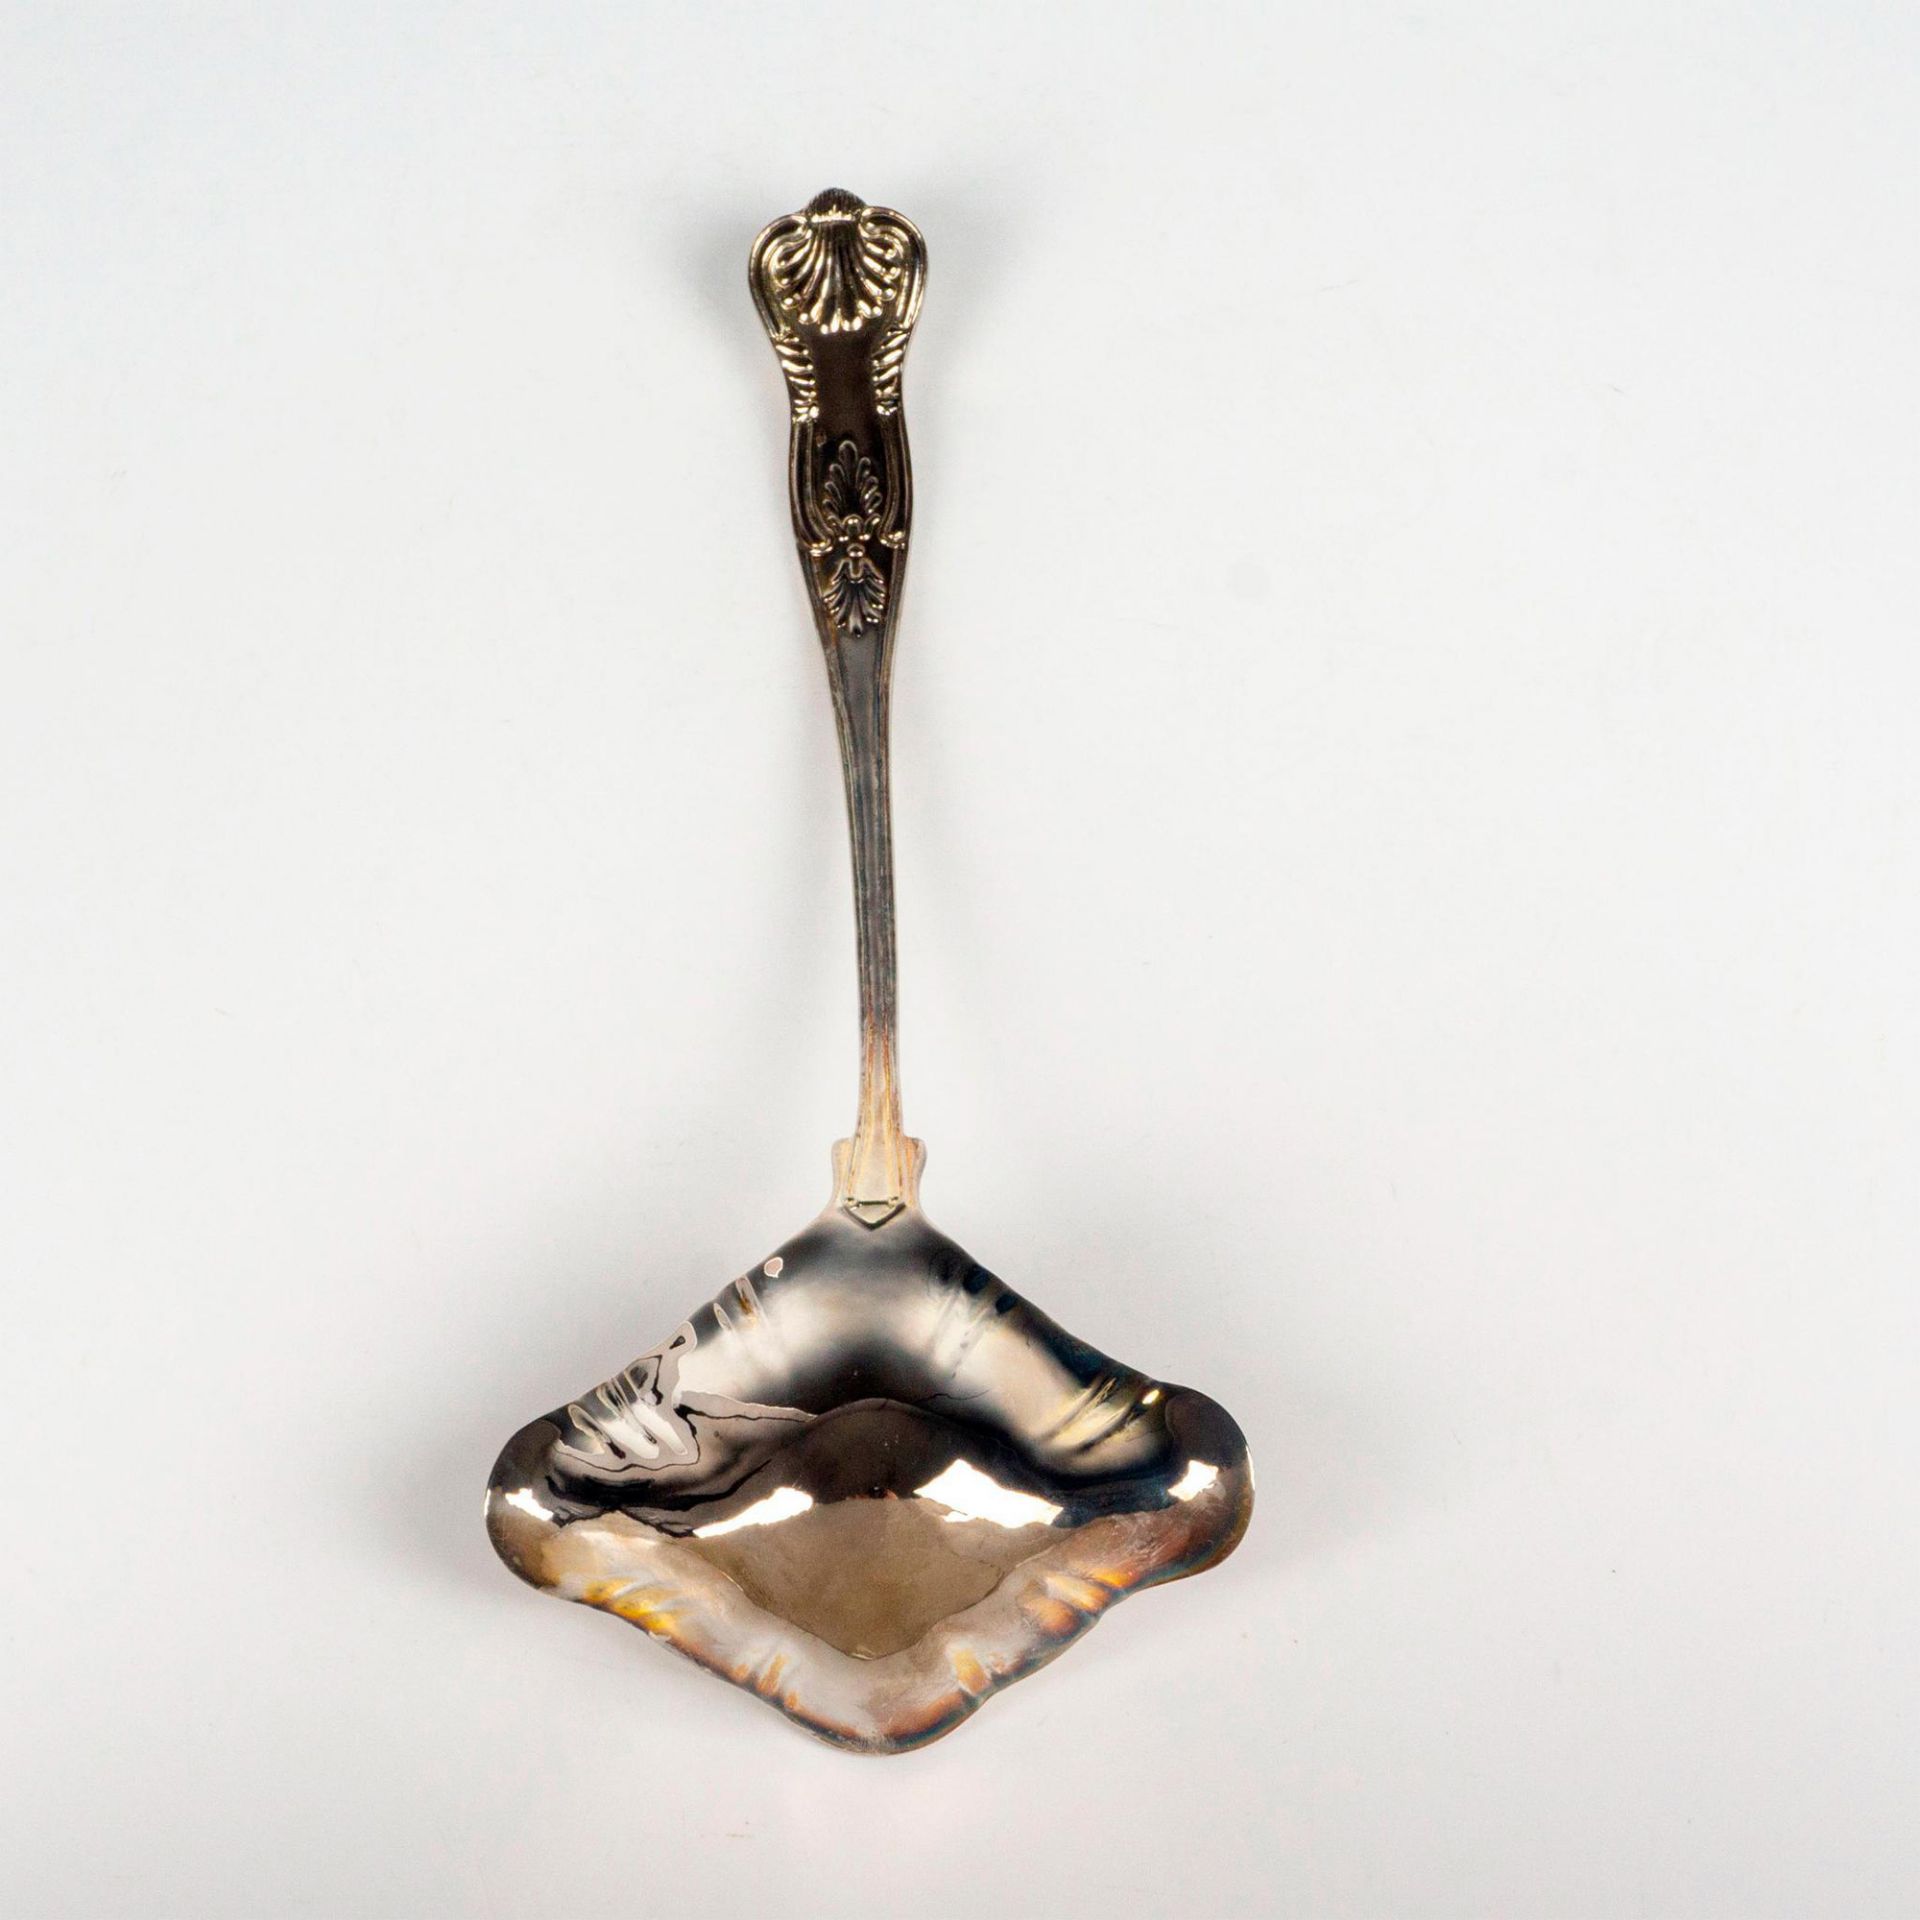 Vintage Silver Plated Serving Spoon - Image 2 of 2